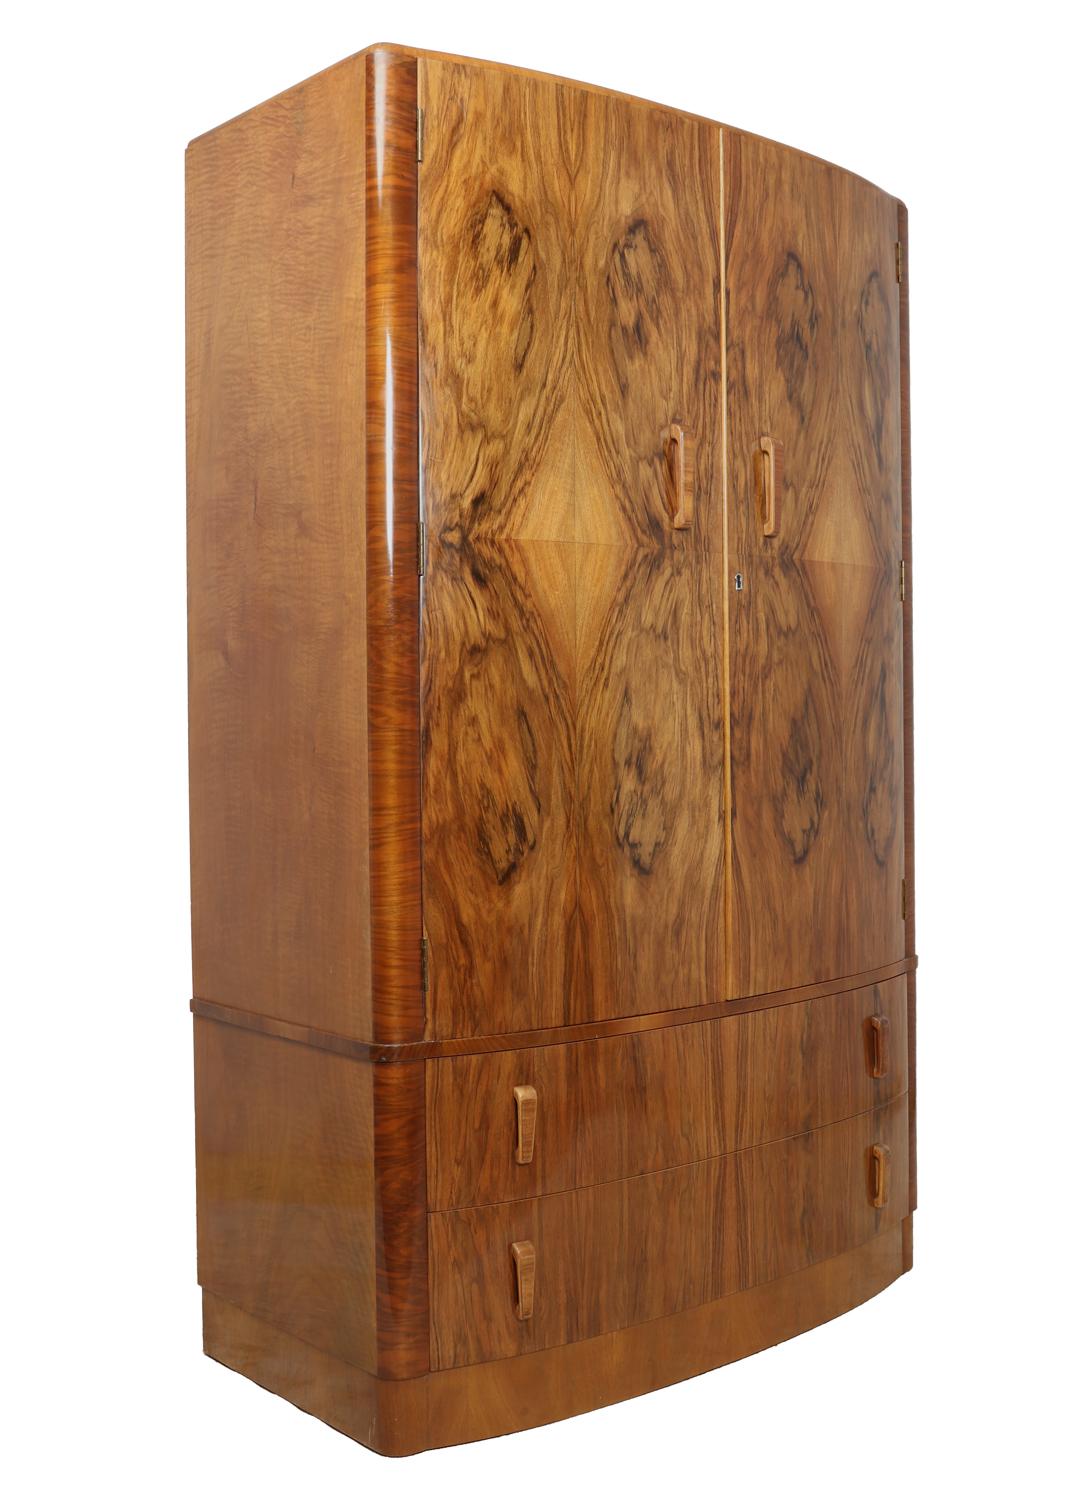 Art Deco walnut wardrobe, circa 1930
A bow fronted two door wardrobe with two long drawers underneath and fitted interior, the wardrobe has been polished and is in excellent condition

Age: 1930

Style: Art Deco

Material: Walnut

Origin: